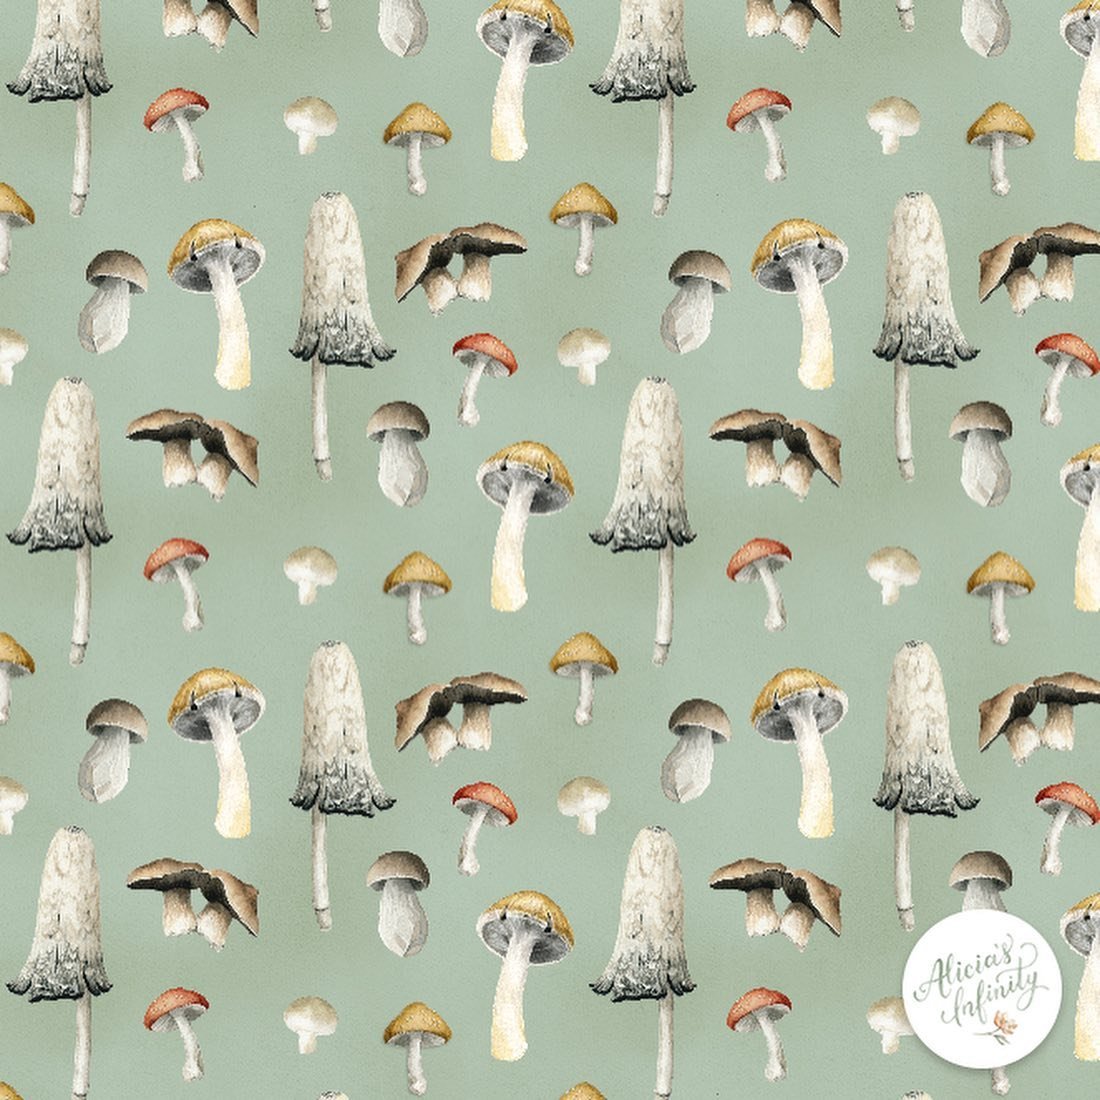 Mushrooms! I know mushrooms have been everywhere for a while, but I had to make a pattern with the mushrooms I painted a few years ago for my autumn collection! They were just begging to have their own moment - they&rsquo;re such characters ;) 

I co